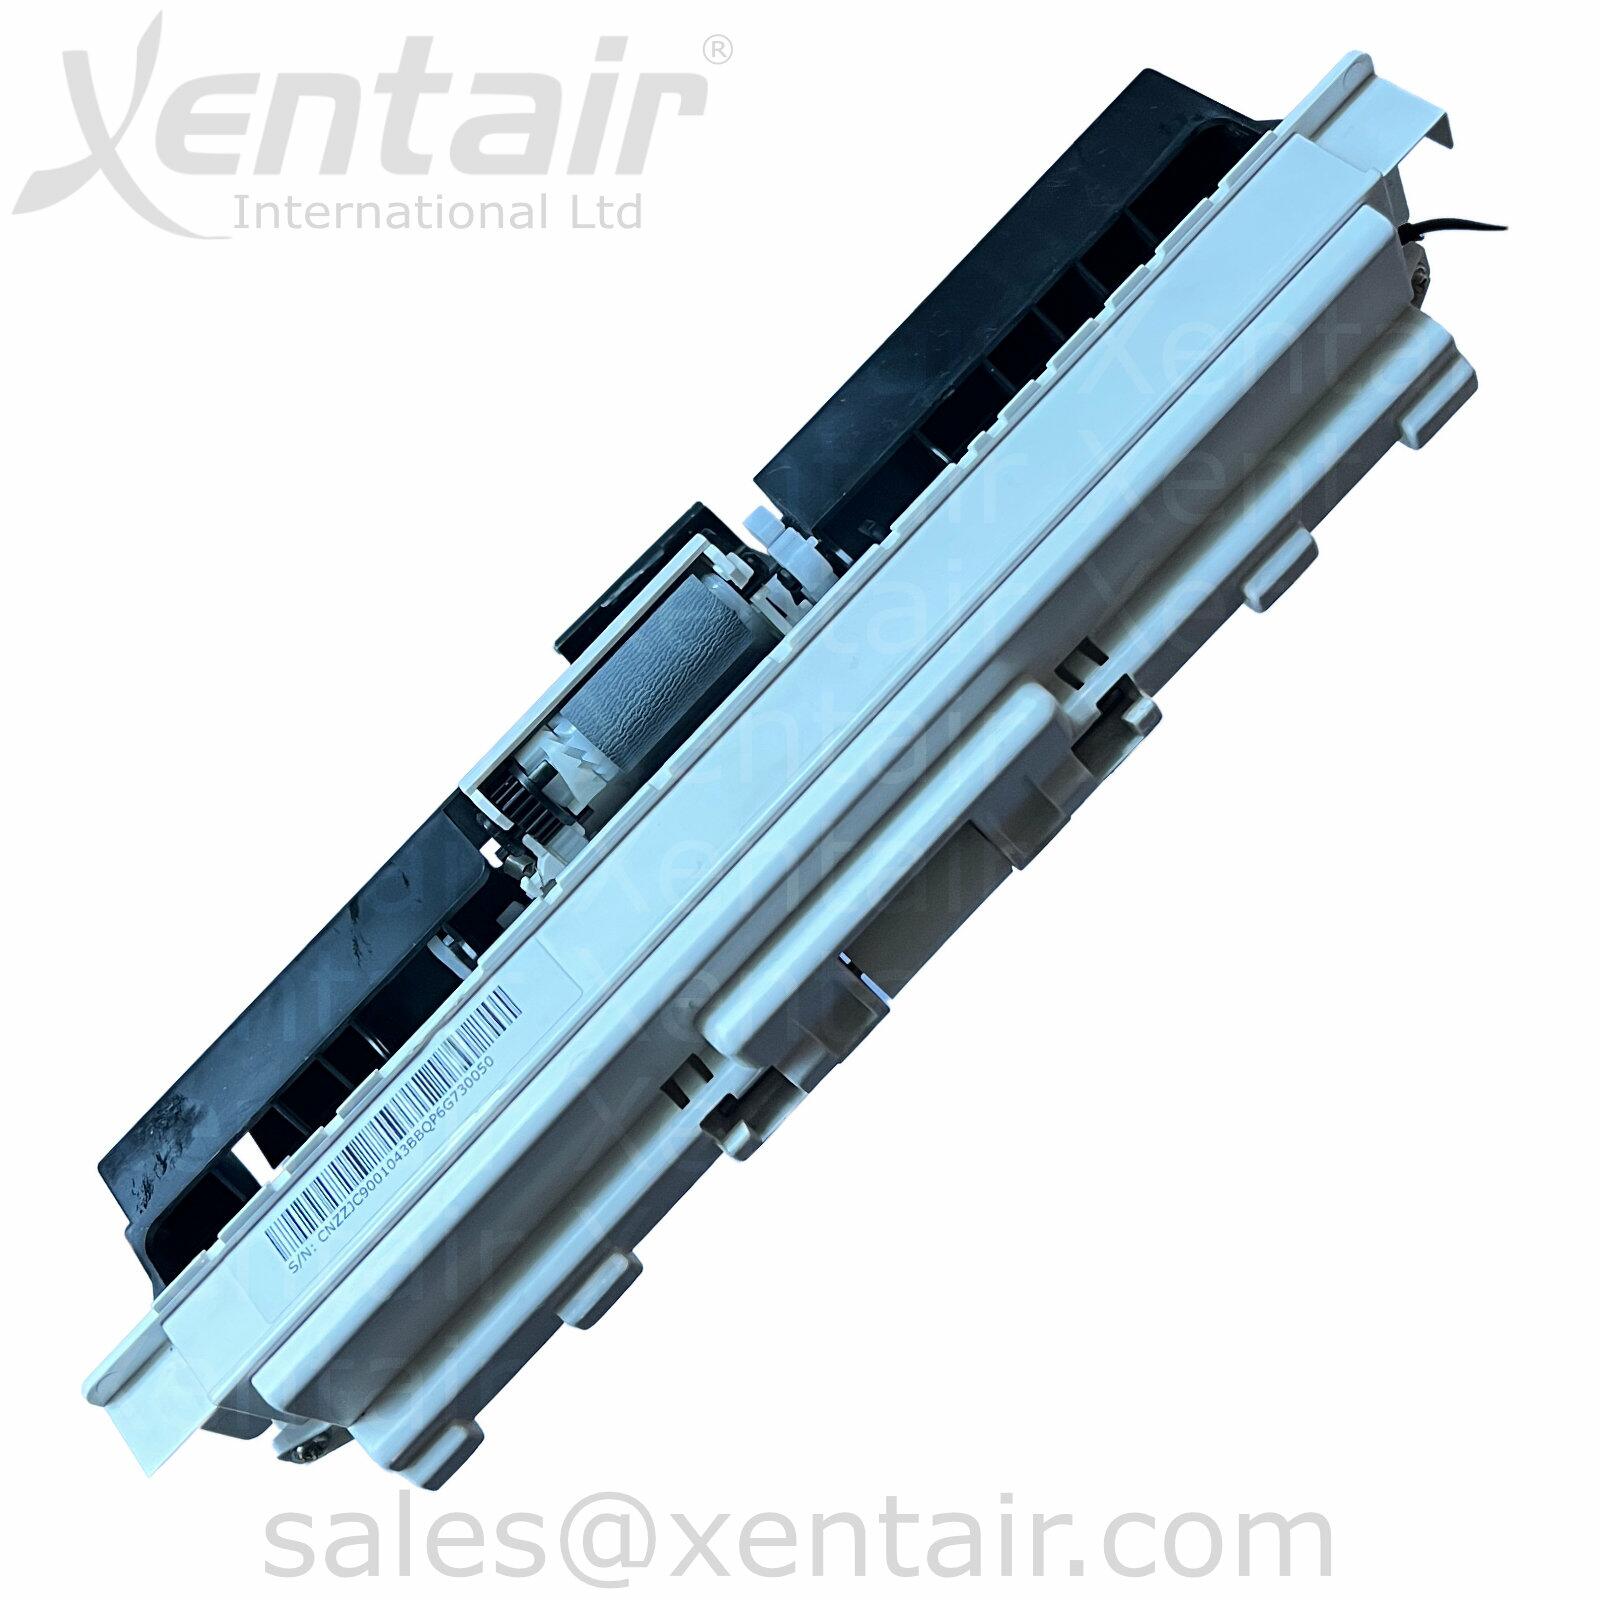 Xerox® WorkCentre™ 3315 3320 3325 MP Bypass Tray Feeder 130N01676 130N1676